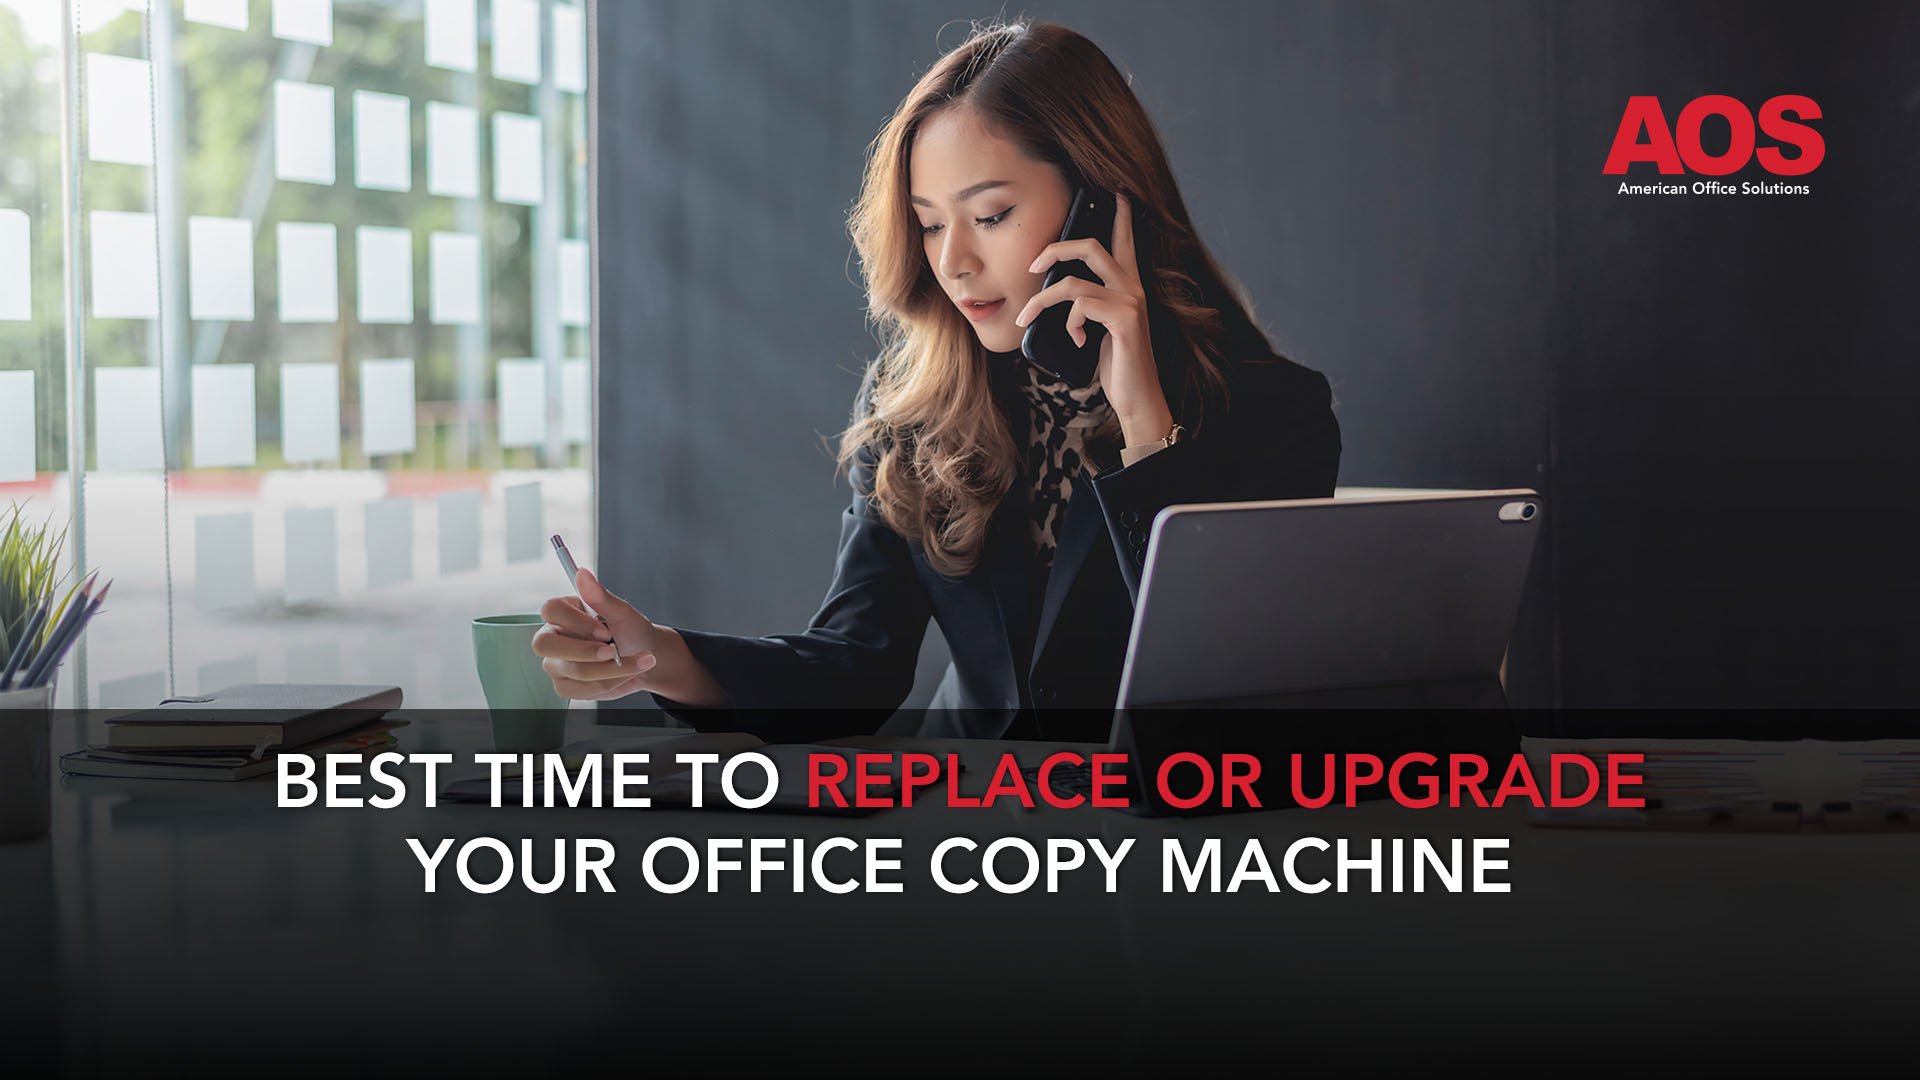 When Is the Best Time to Replace or Upgrade Your Office Copy Machine?